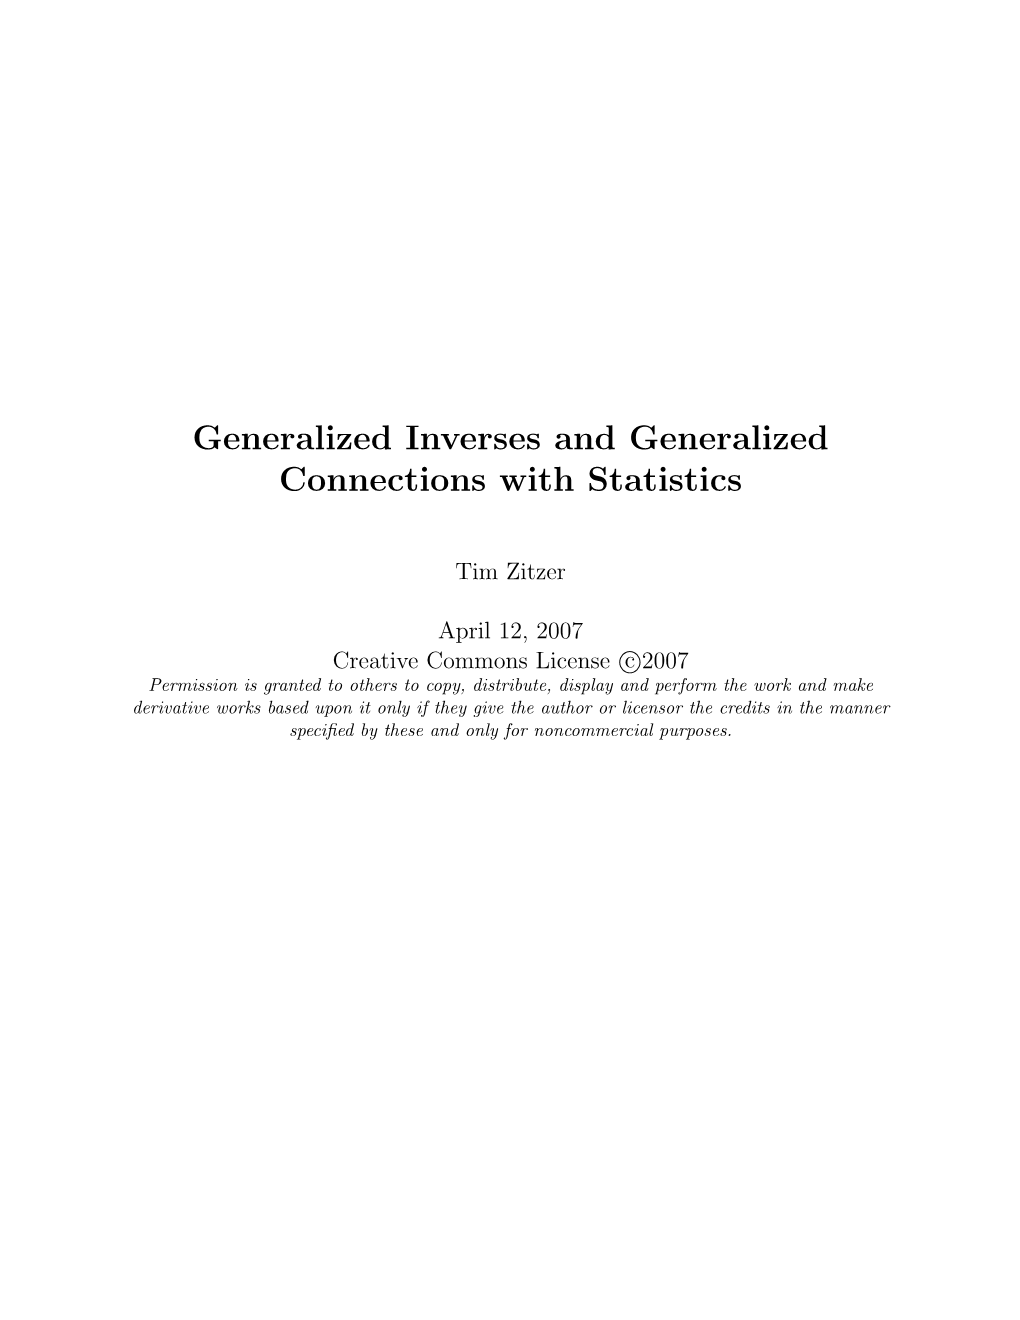 Generalized Inverses and Generalized Connections with Statistics